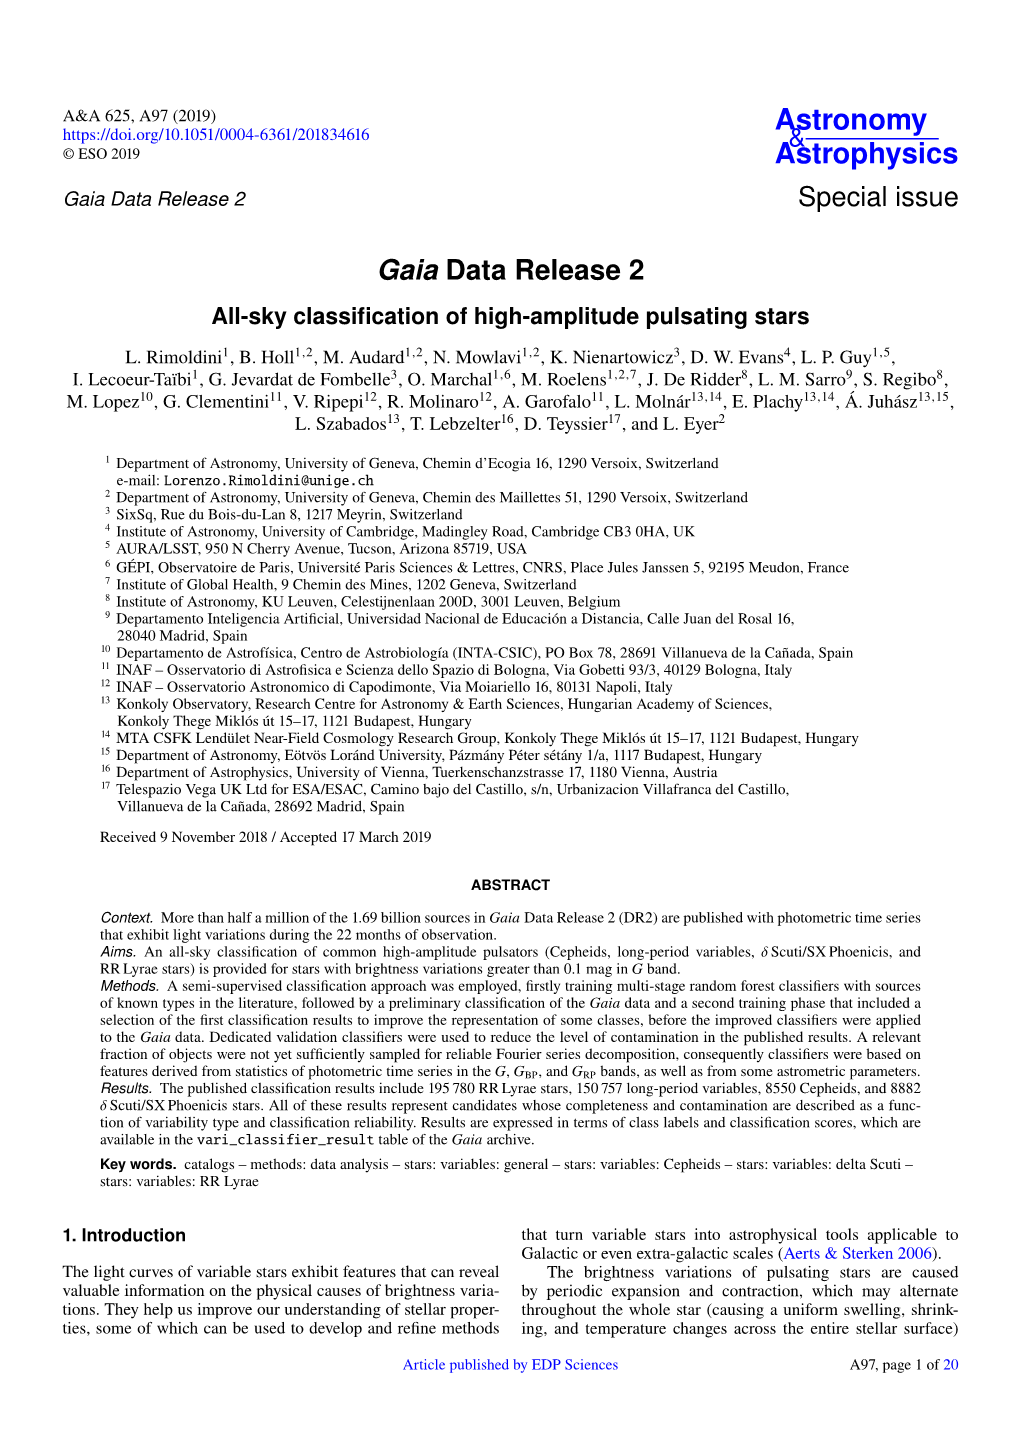 Gaia Data Release 2 Special Issue